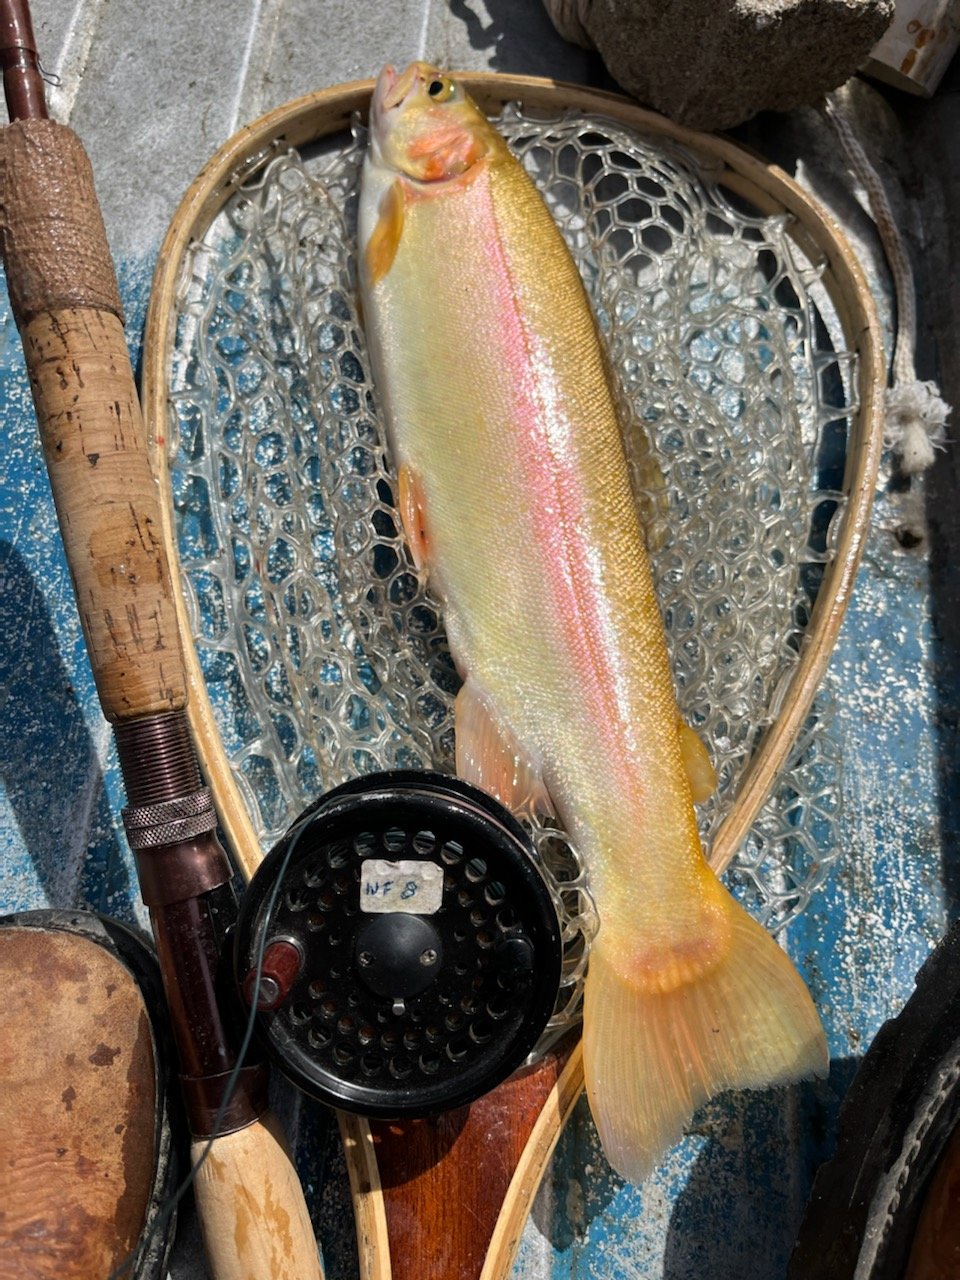 Jeff Spicer, of Scituate, R.I., landed this golden trout with his fly rod when fishing Opening Day.